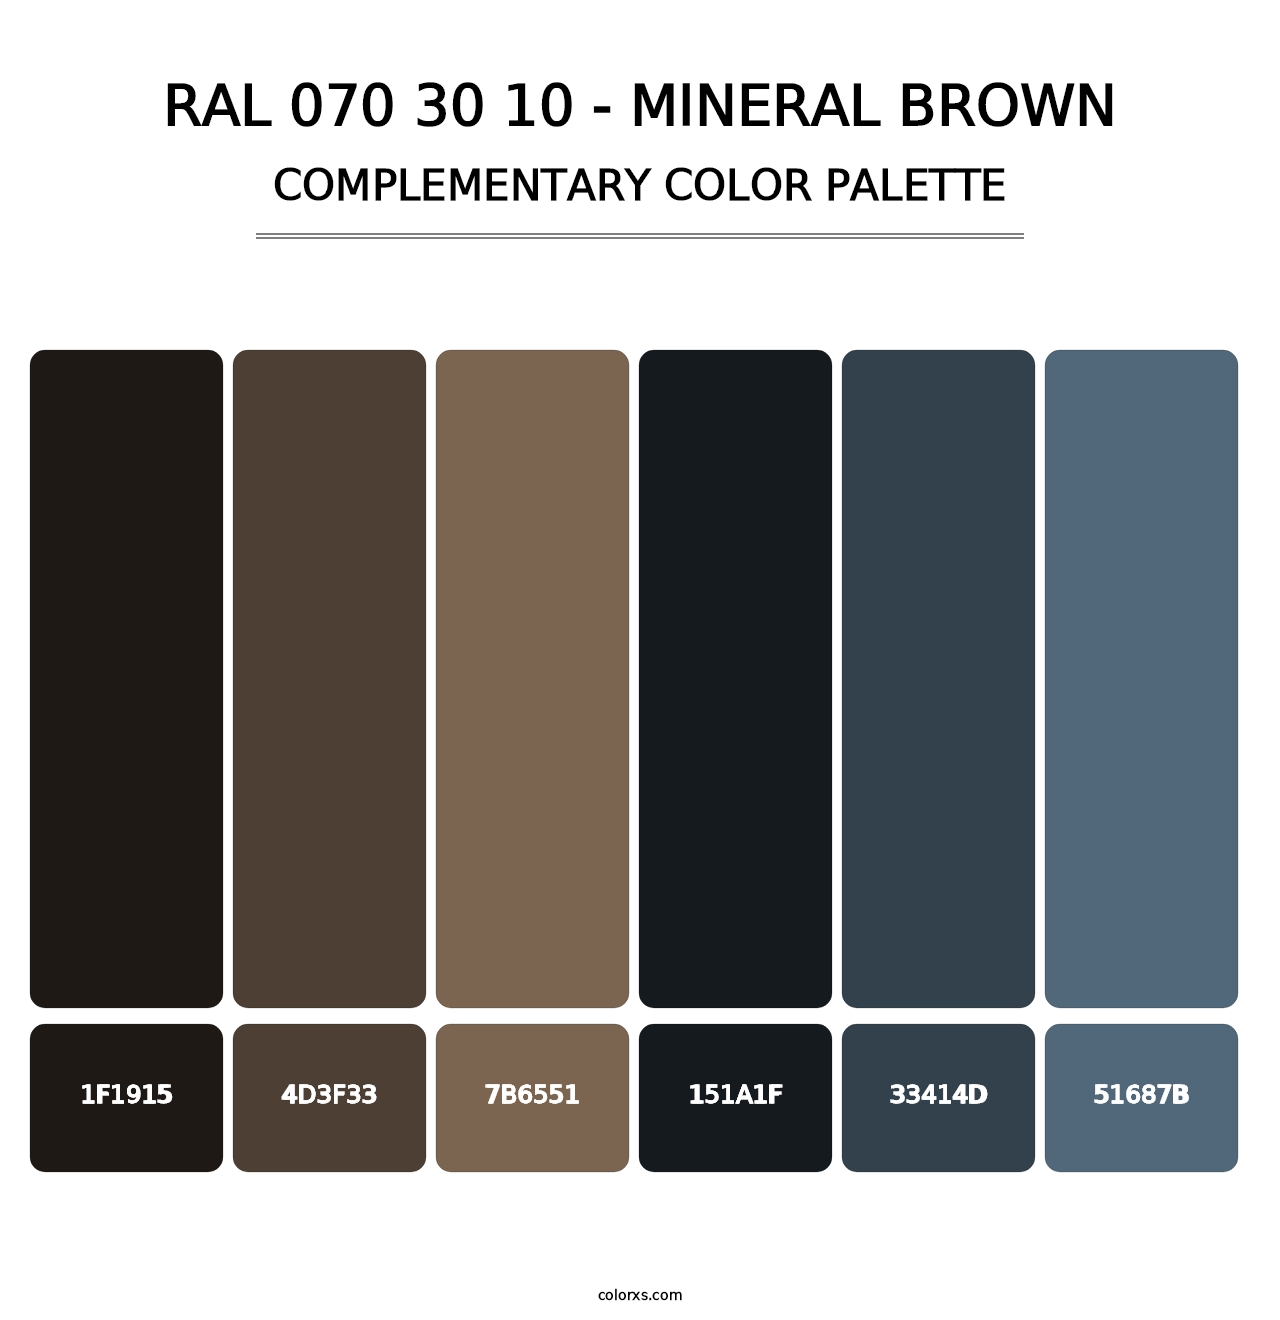 RAL 070 30 10 - Mineral Brown - Complementary Color Palette